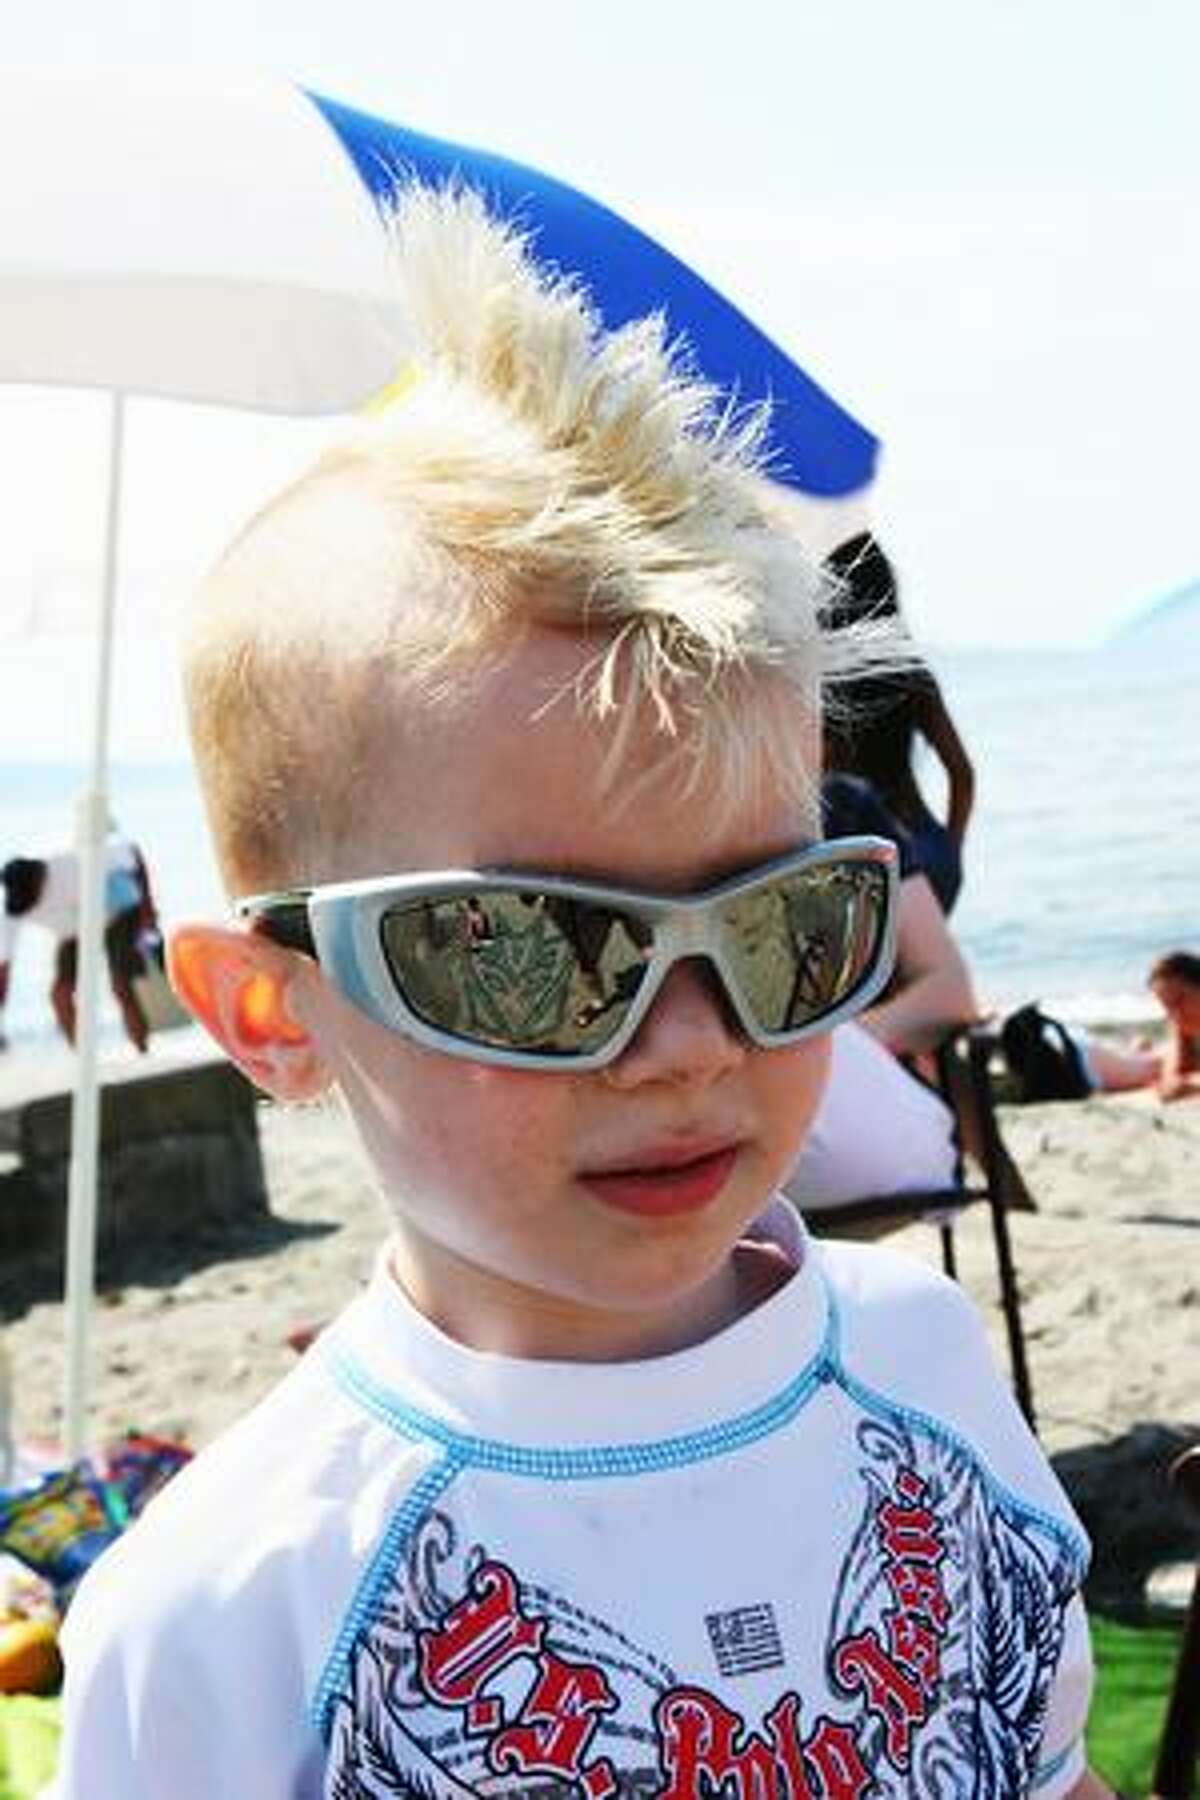 Conrad Kosa, 2, shows off his cool summer mohawk at Alki beach in West Seattle.